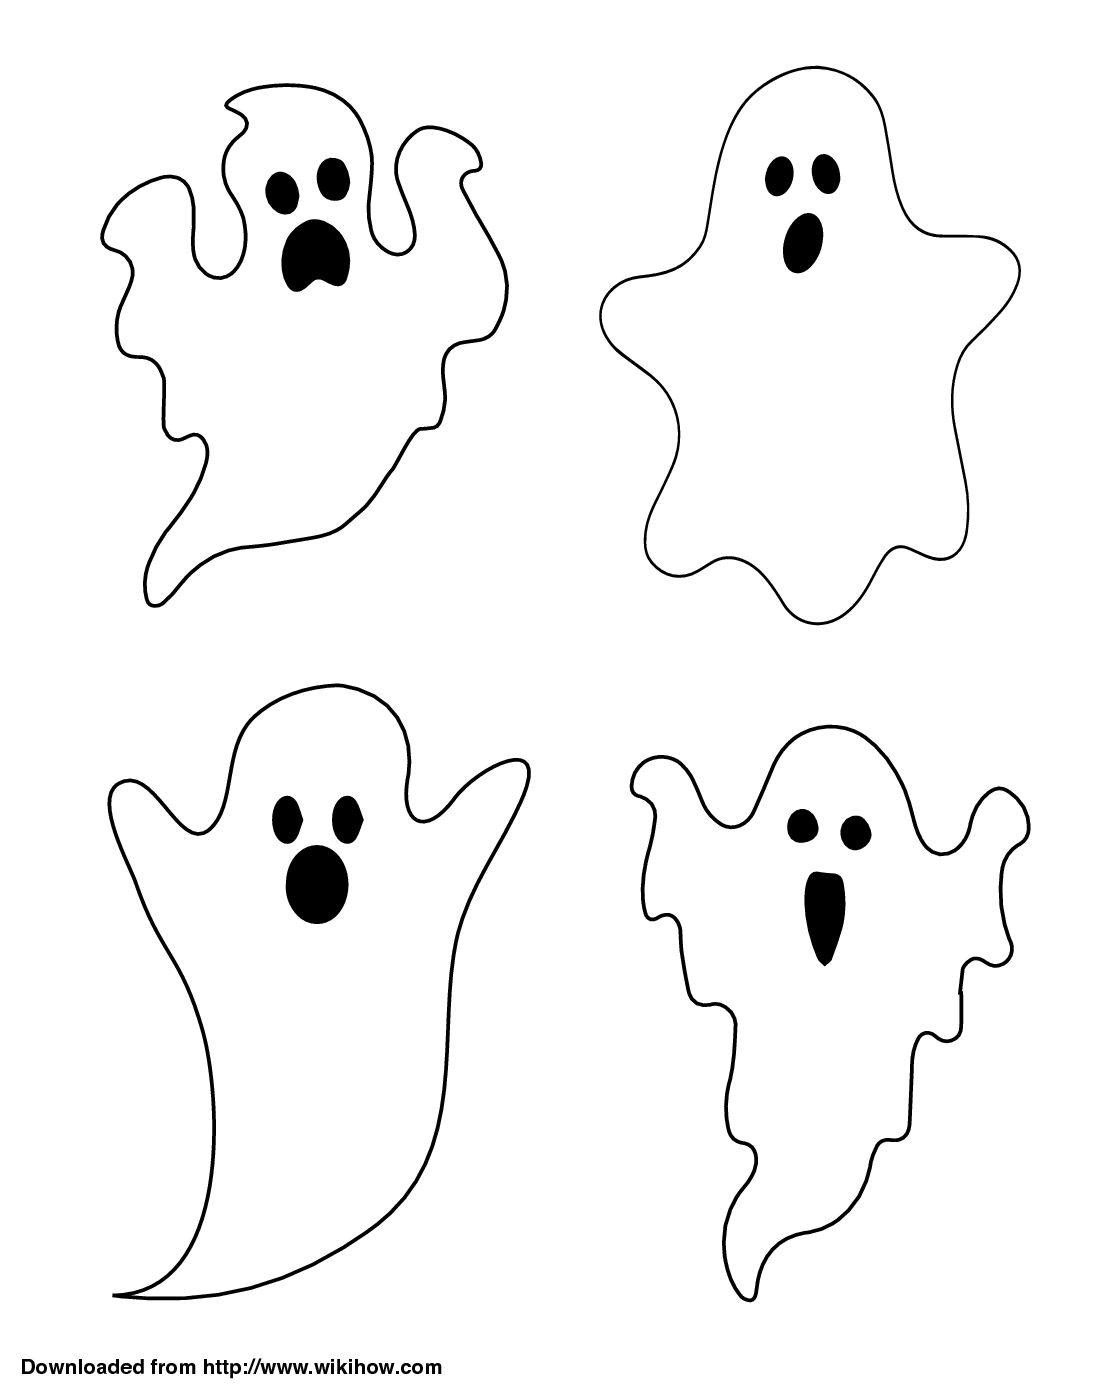 3 Ways To Draw A Ghost Wikihow Bricolage Halloween Halloween Templates Halloween Crafts For Kids